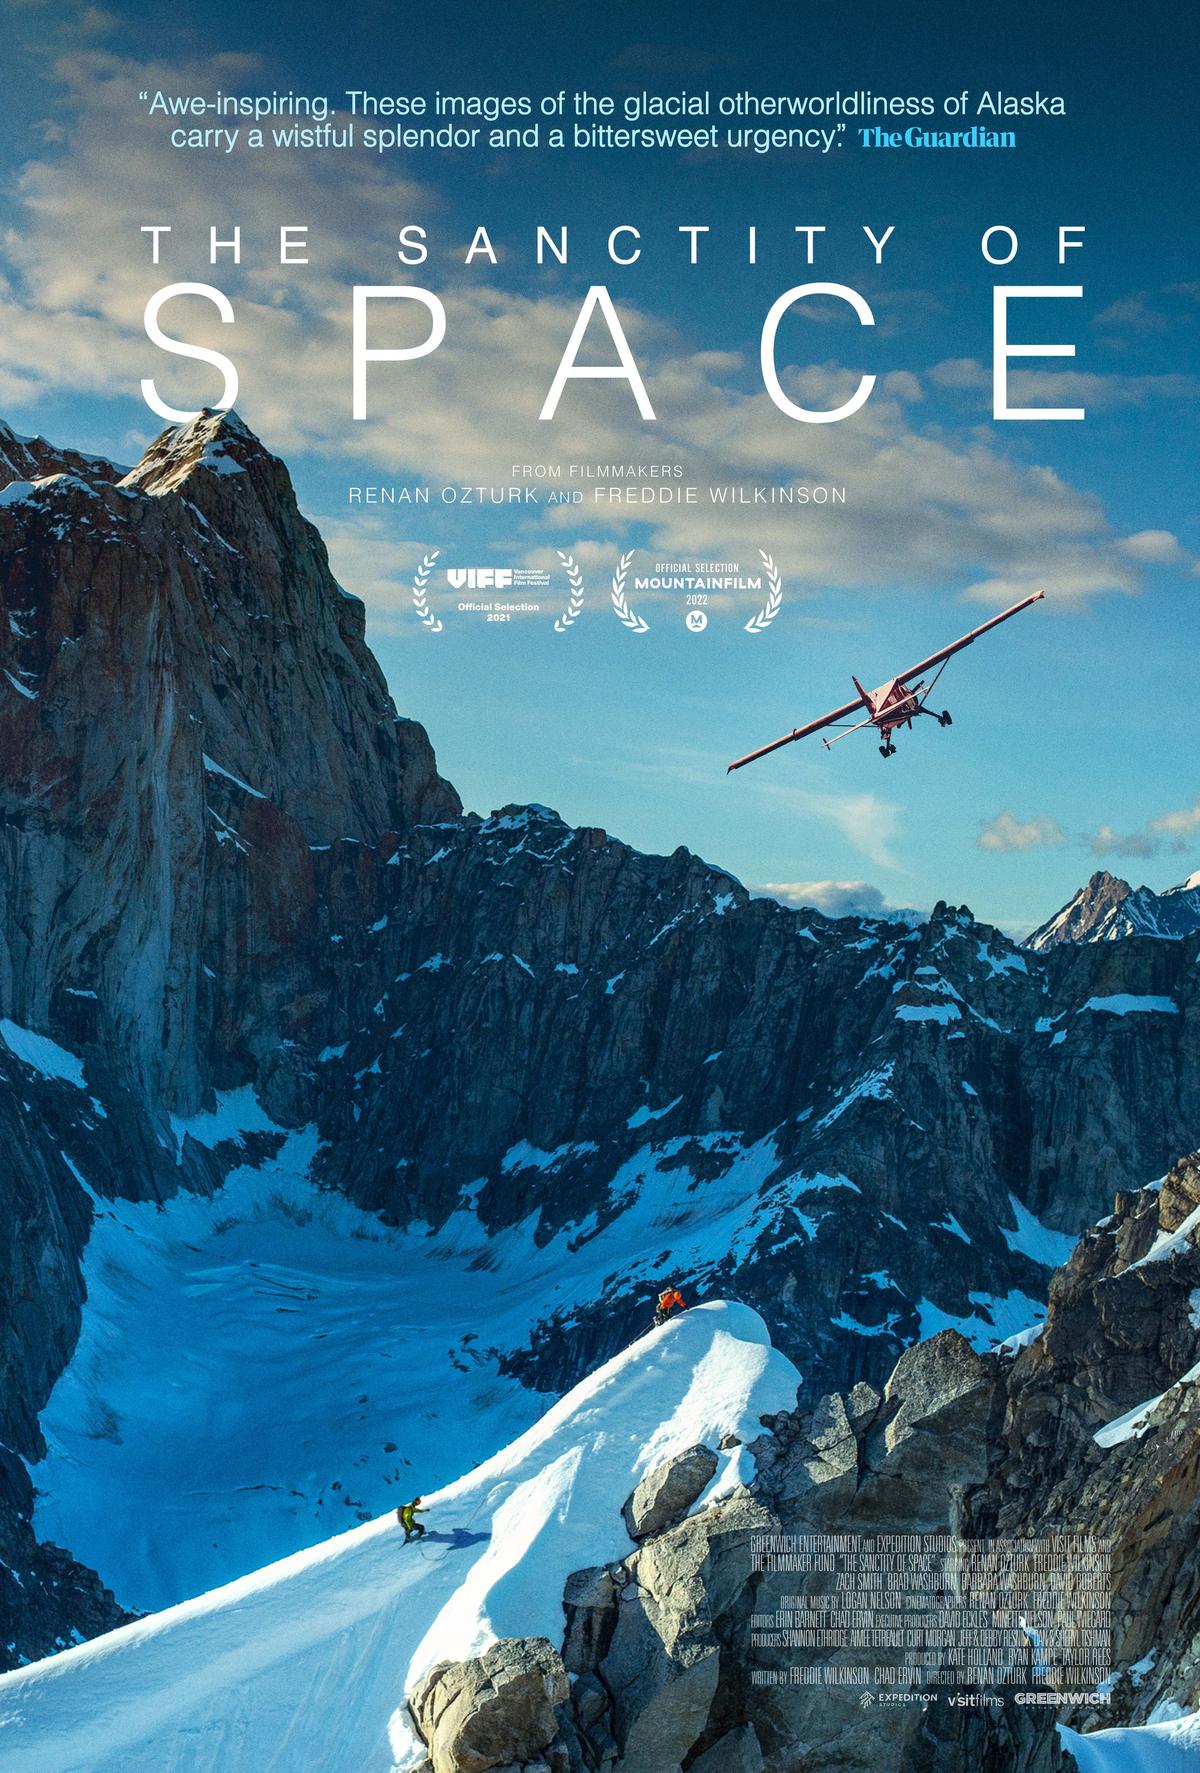 Movie poster for "The Sanctity of Space." (Renan Ozturk/Greenwich Entertainment)